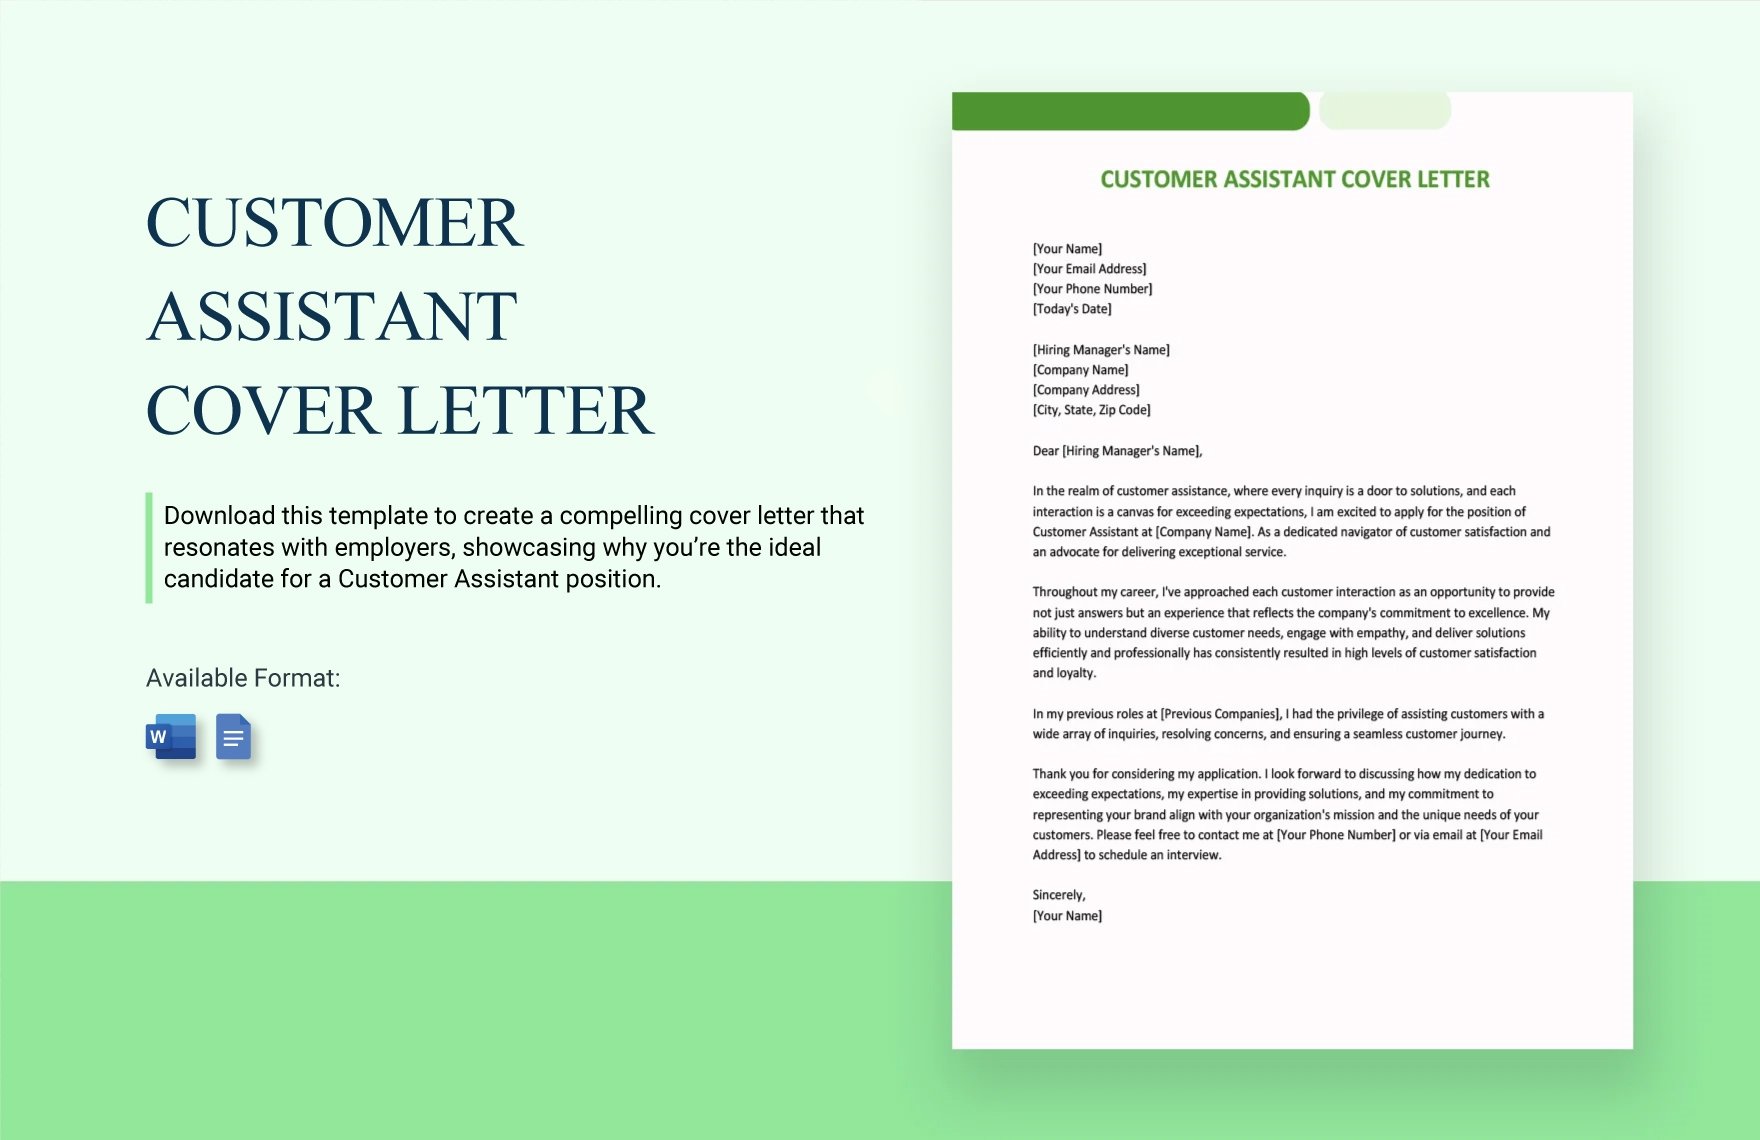 Customer Assistant Cover Letter in Word, Google Docs